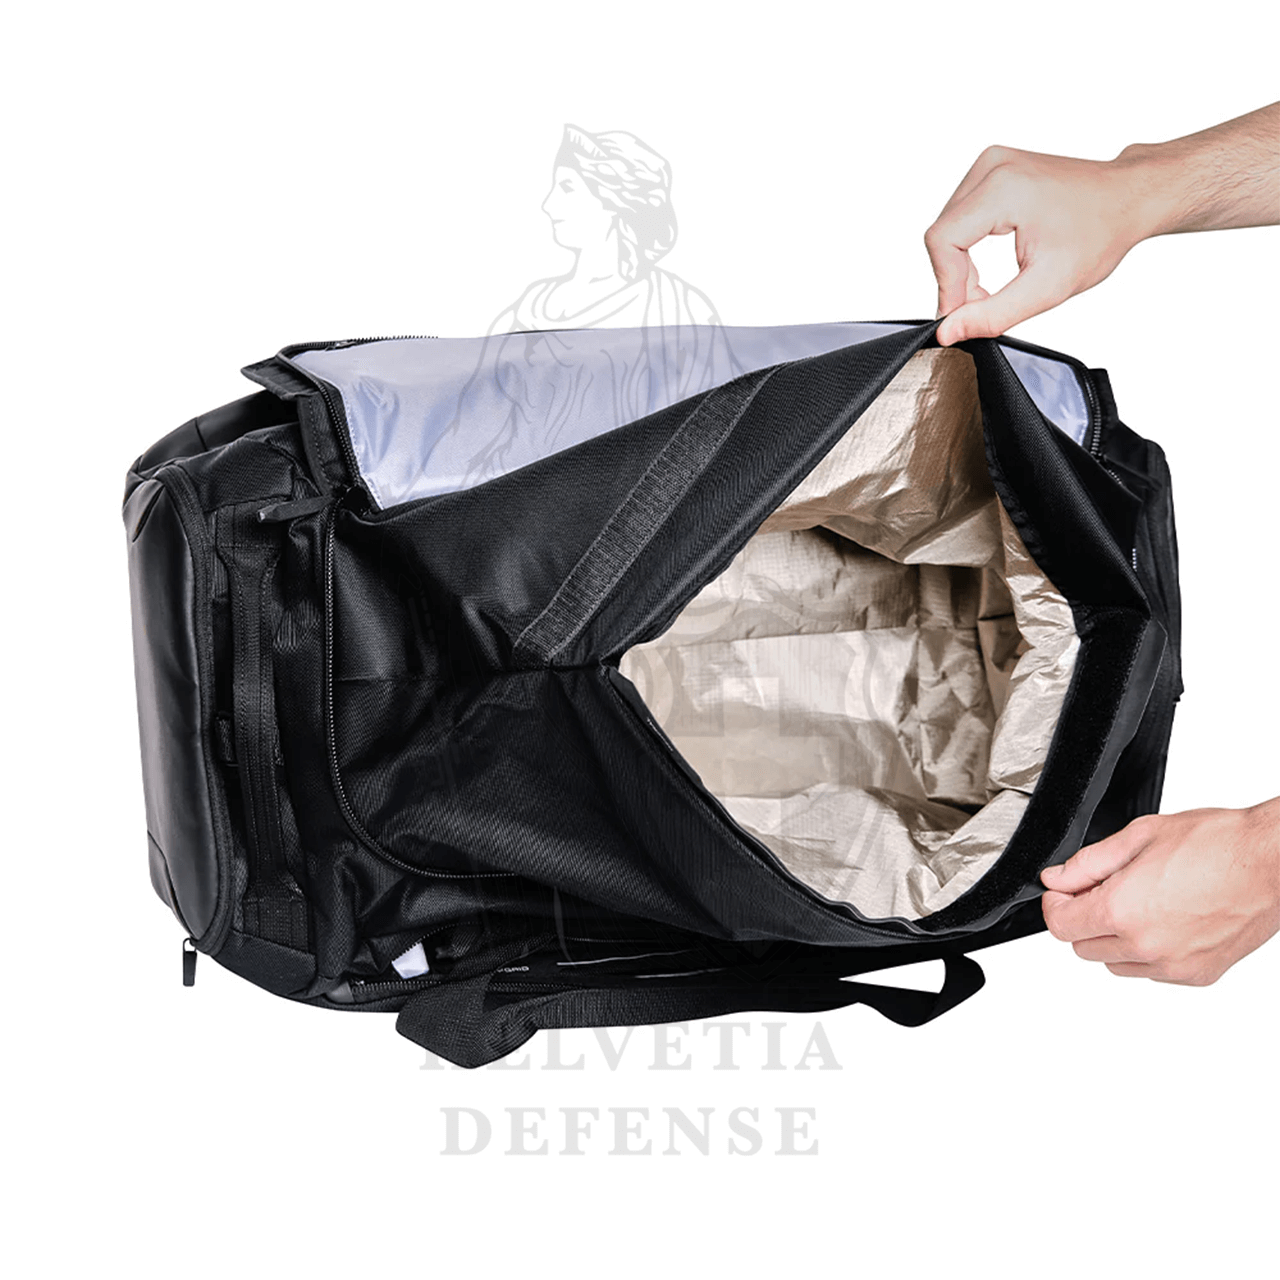 OffGrid Duffel - Rugged Faraday Bag for Device Protection